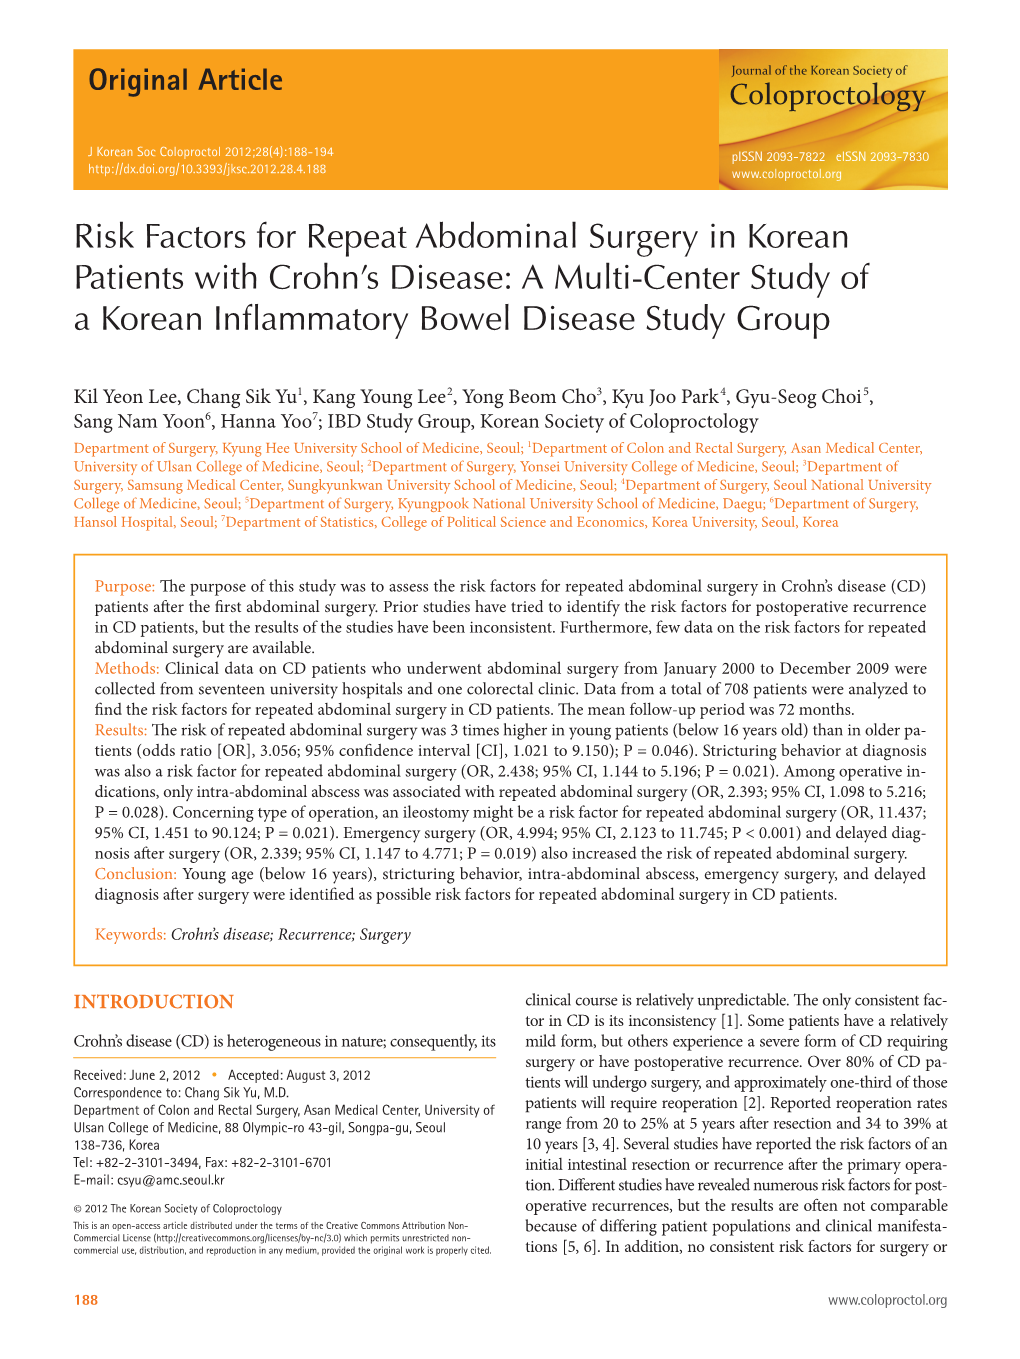 Risk Factors for Repeat Abdominal Surgery in Korean Patients with Crohn's Disease: a Multi-Center Study of a Korean Inflammatory Bowel Disease Study Group